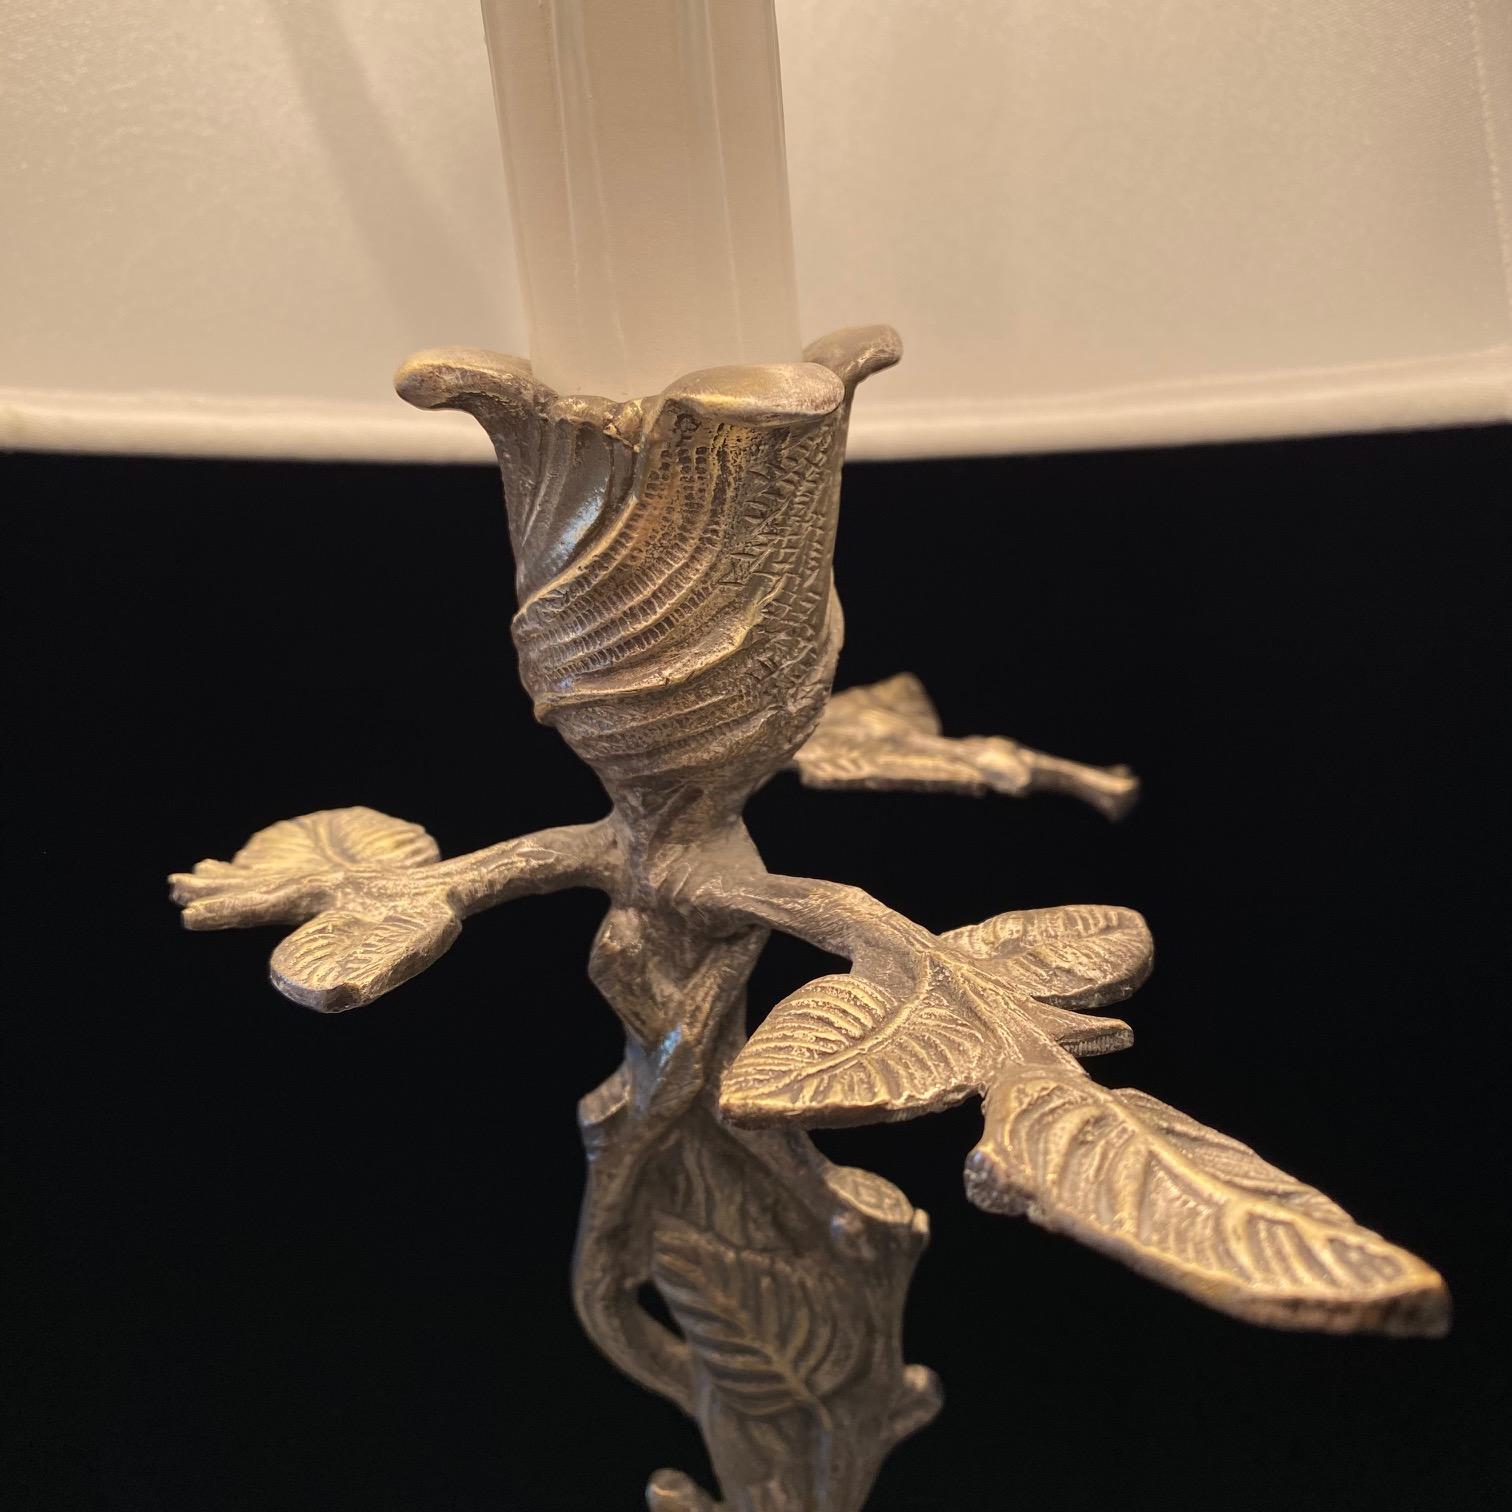  Silver Plated Bronze Deer Sculpture Table Lamp with Leaves and Twigs  4